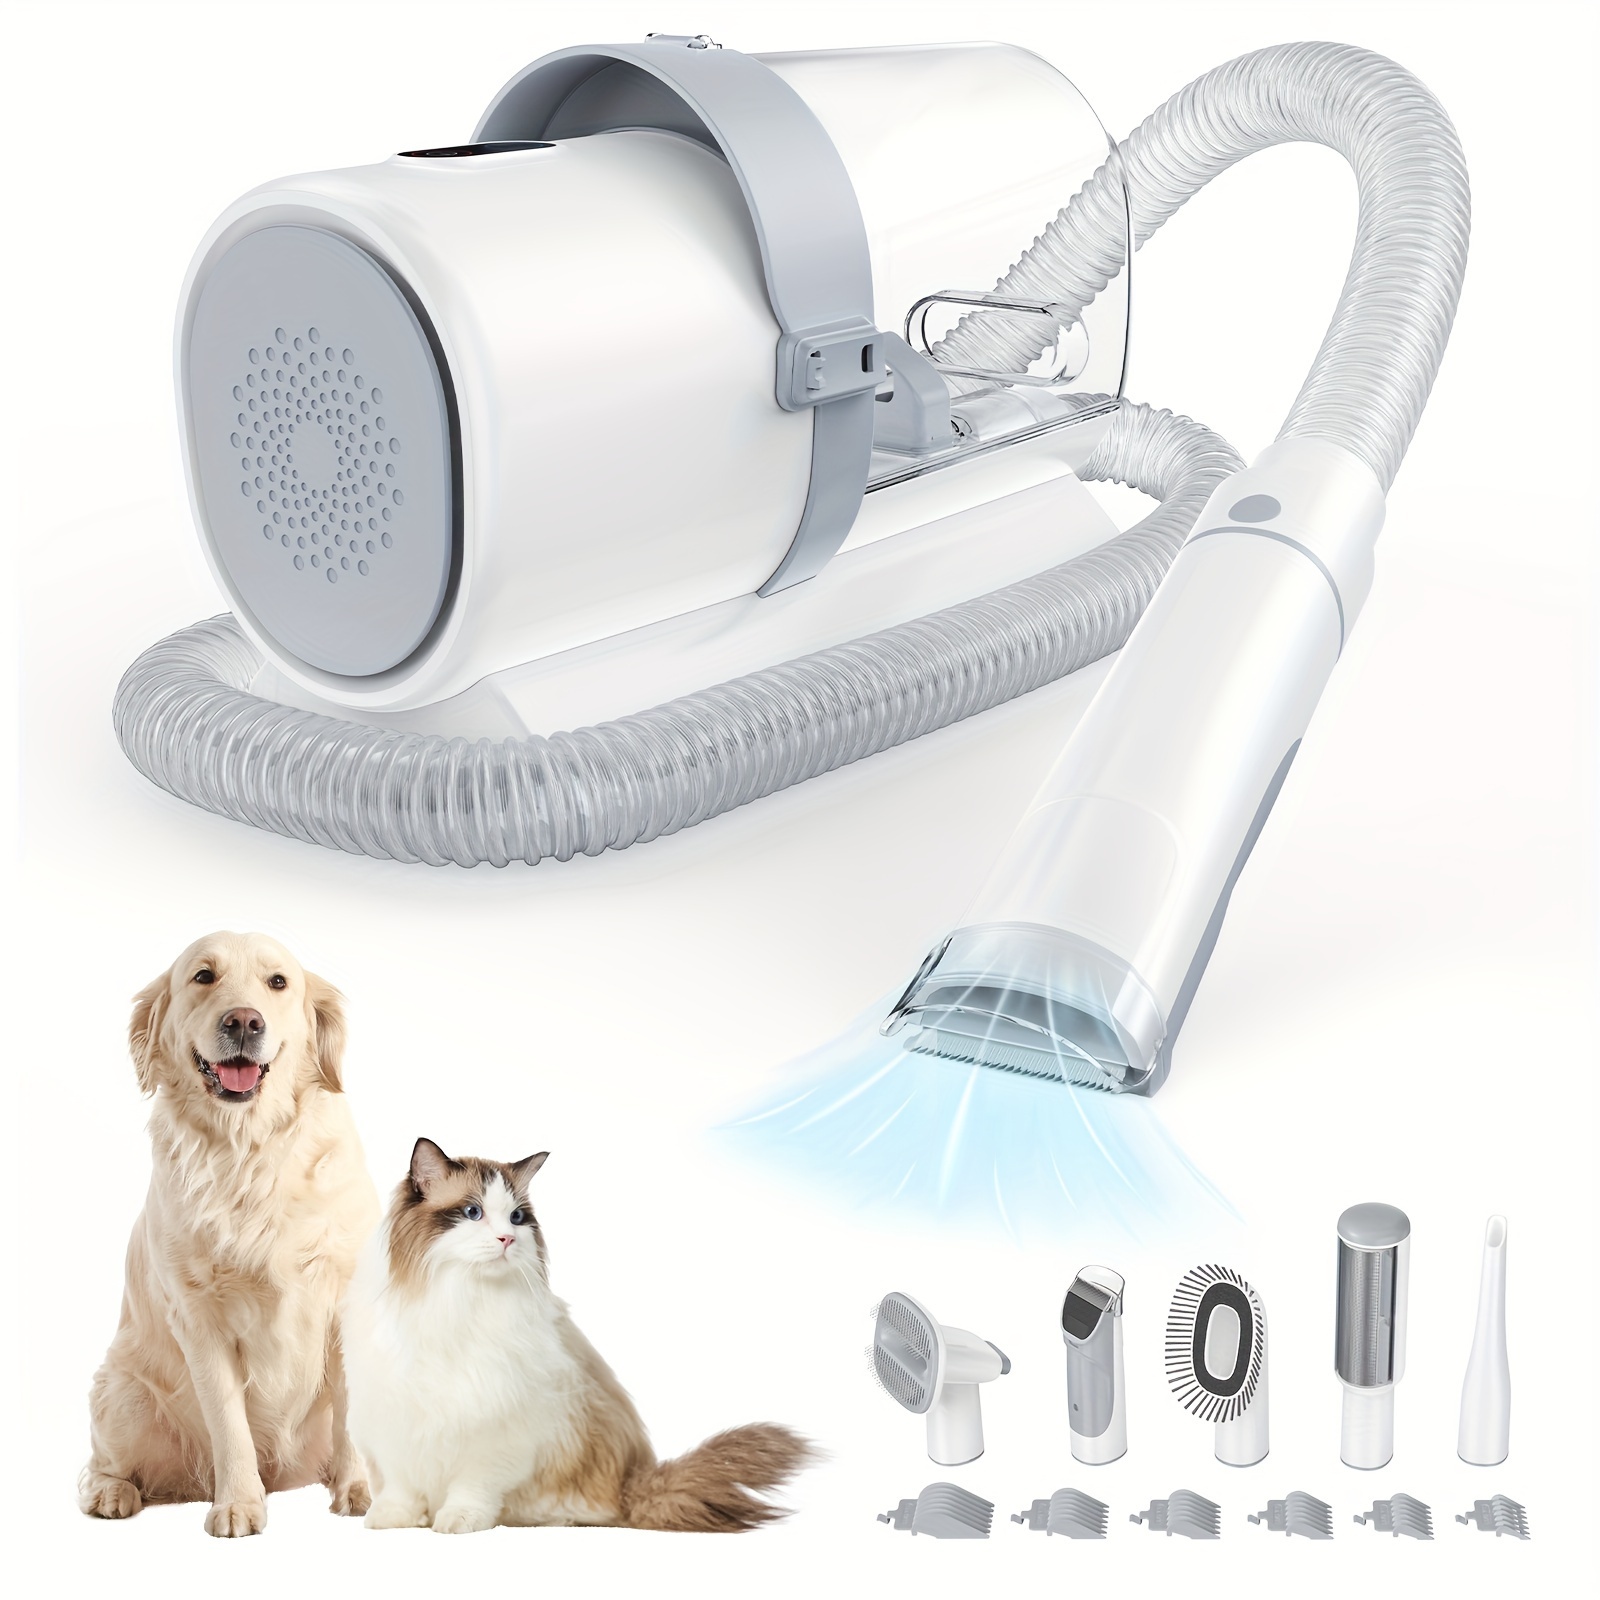 

Pet Grooming Vacuum Kit 5 In 1, Vacuum Suction Strong Power 99% Pet Hair, Professional Clippers With 6 Guide Combs, Mulifunctional Grooming Tools For Dogs Cats And Other Animals